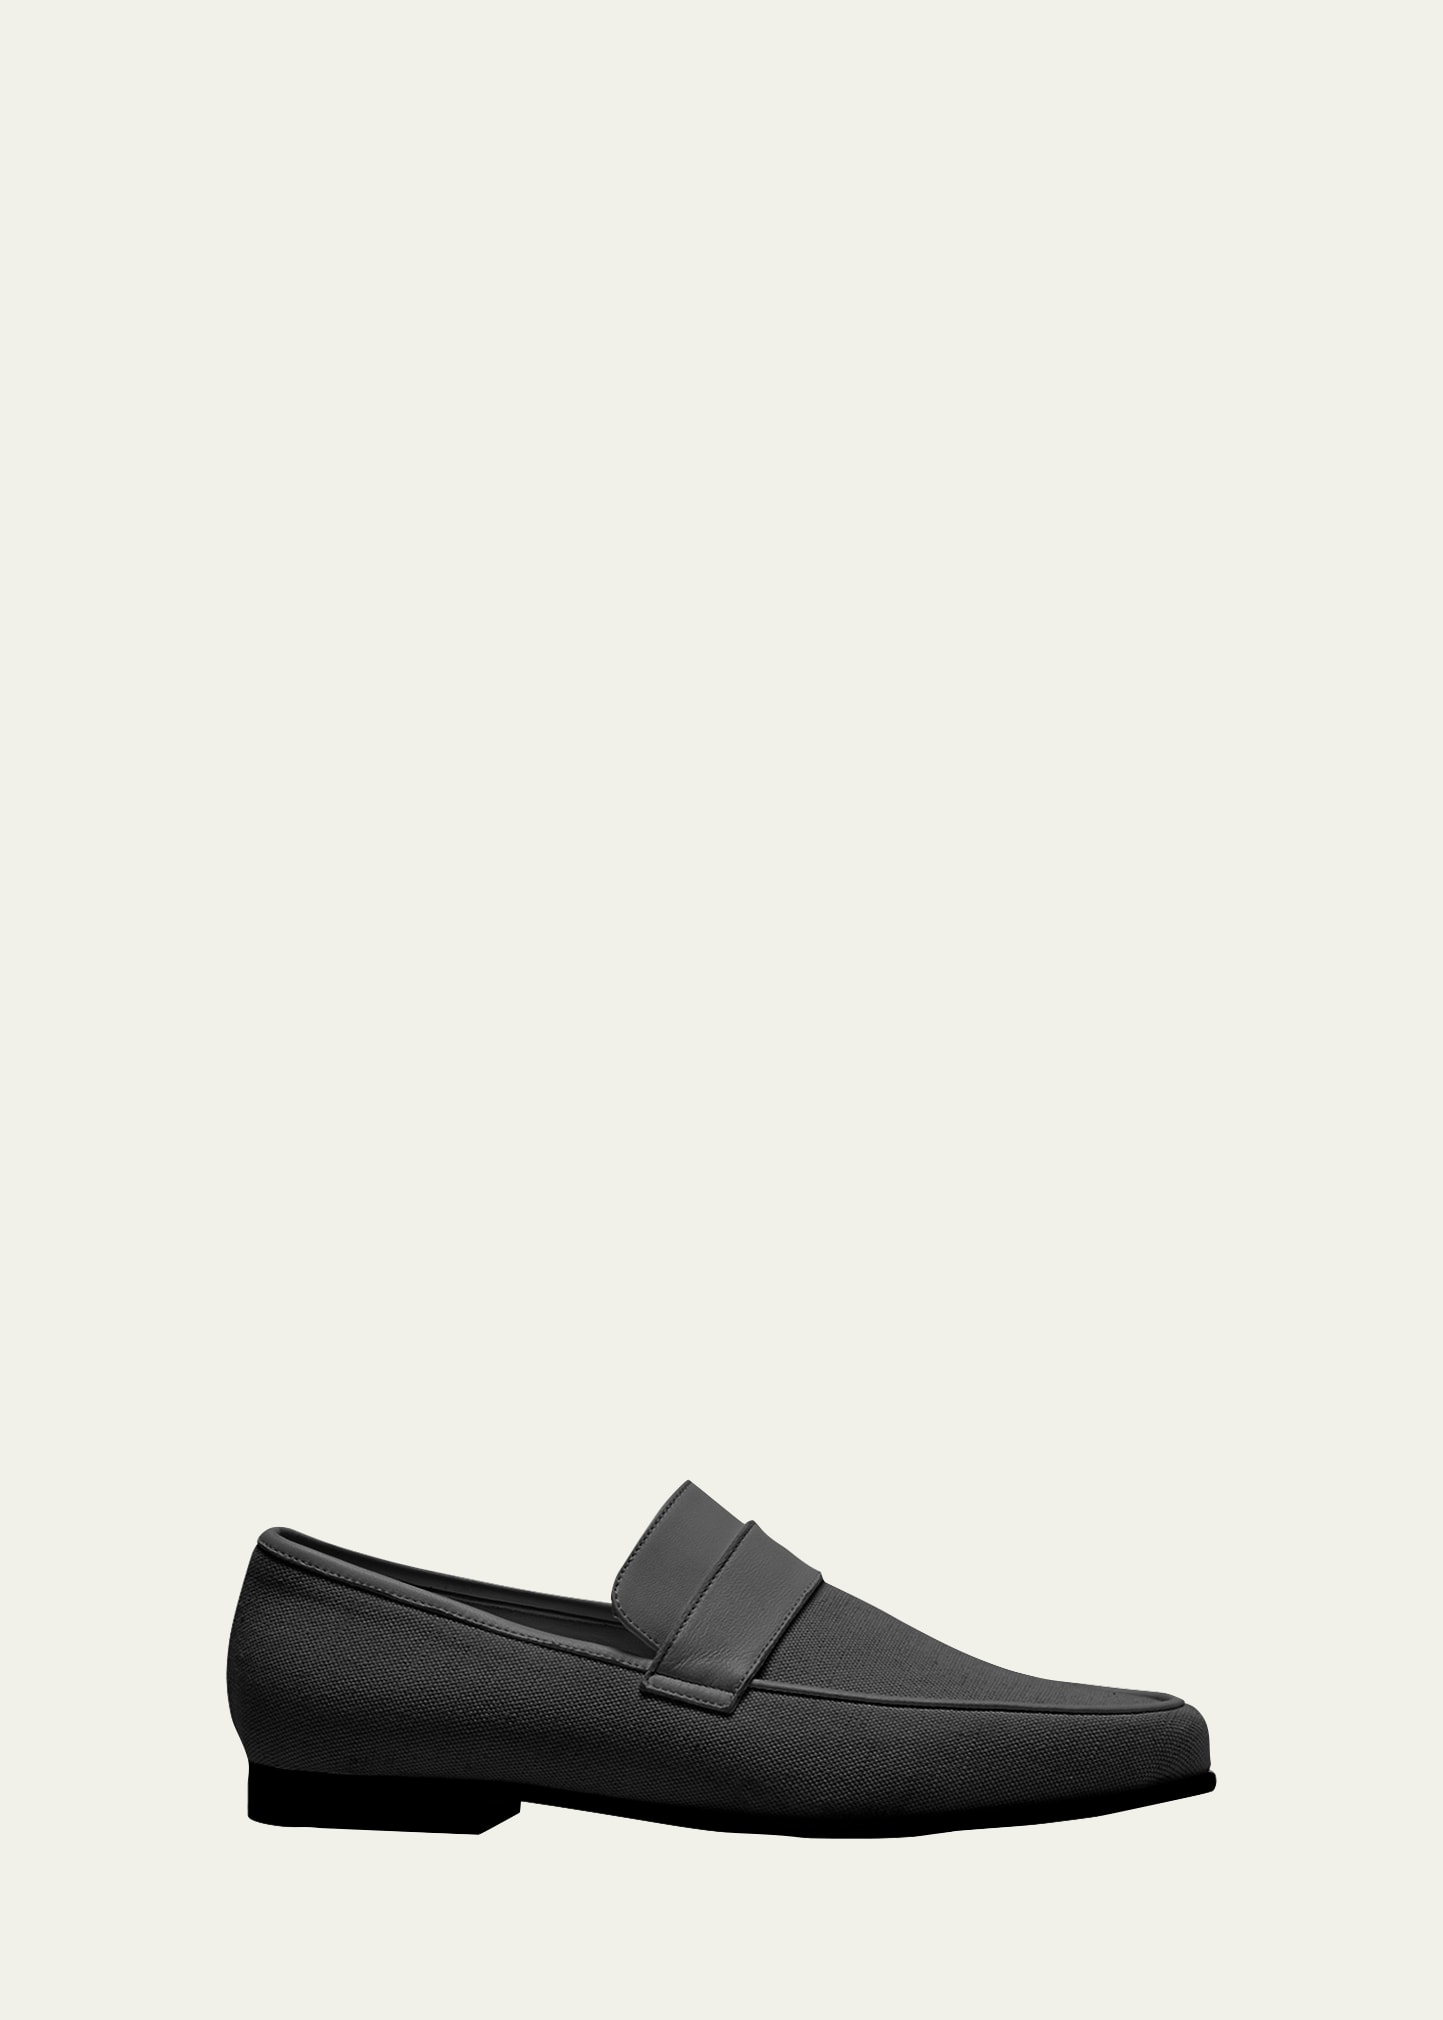 The Canvas Penny Loafers